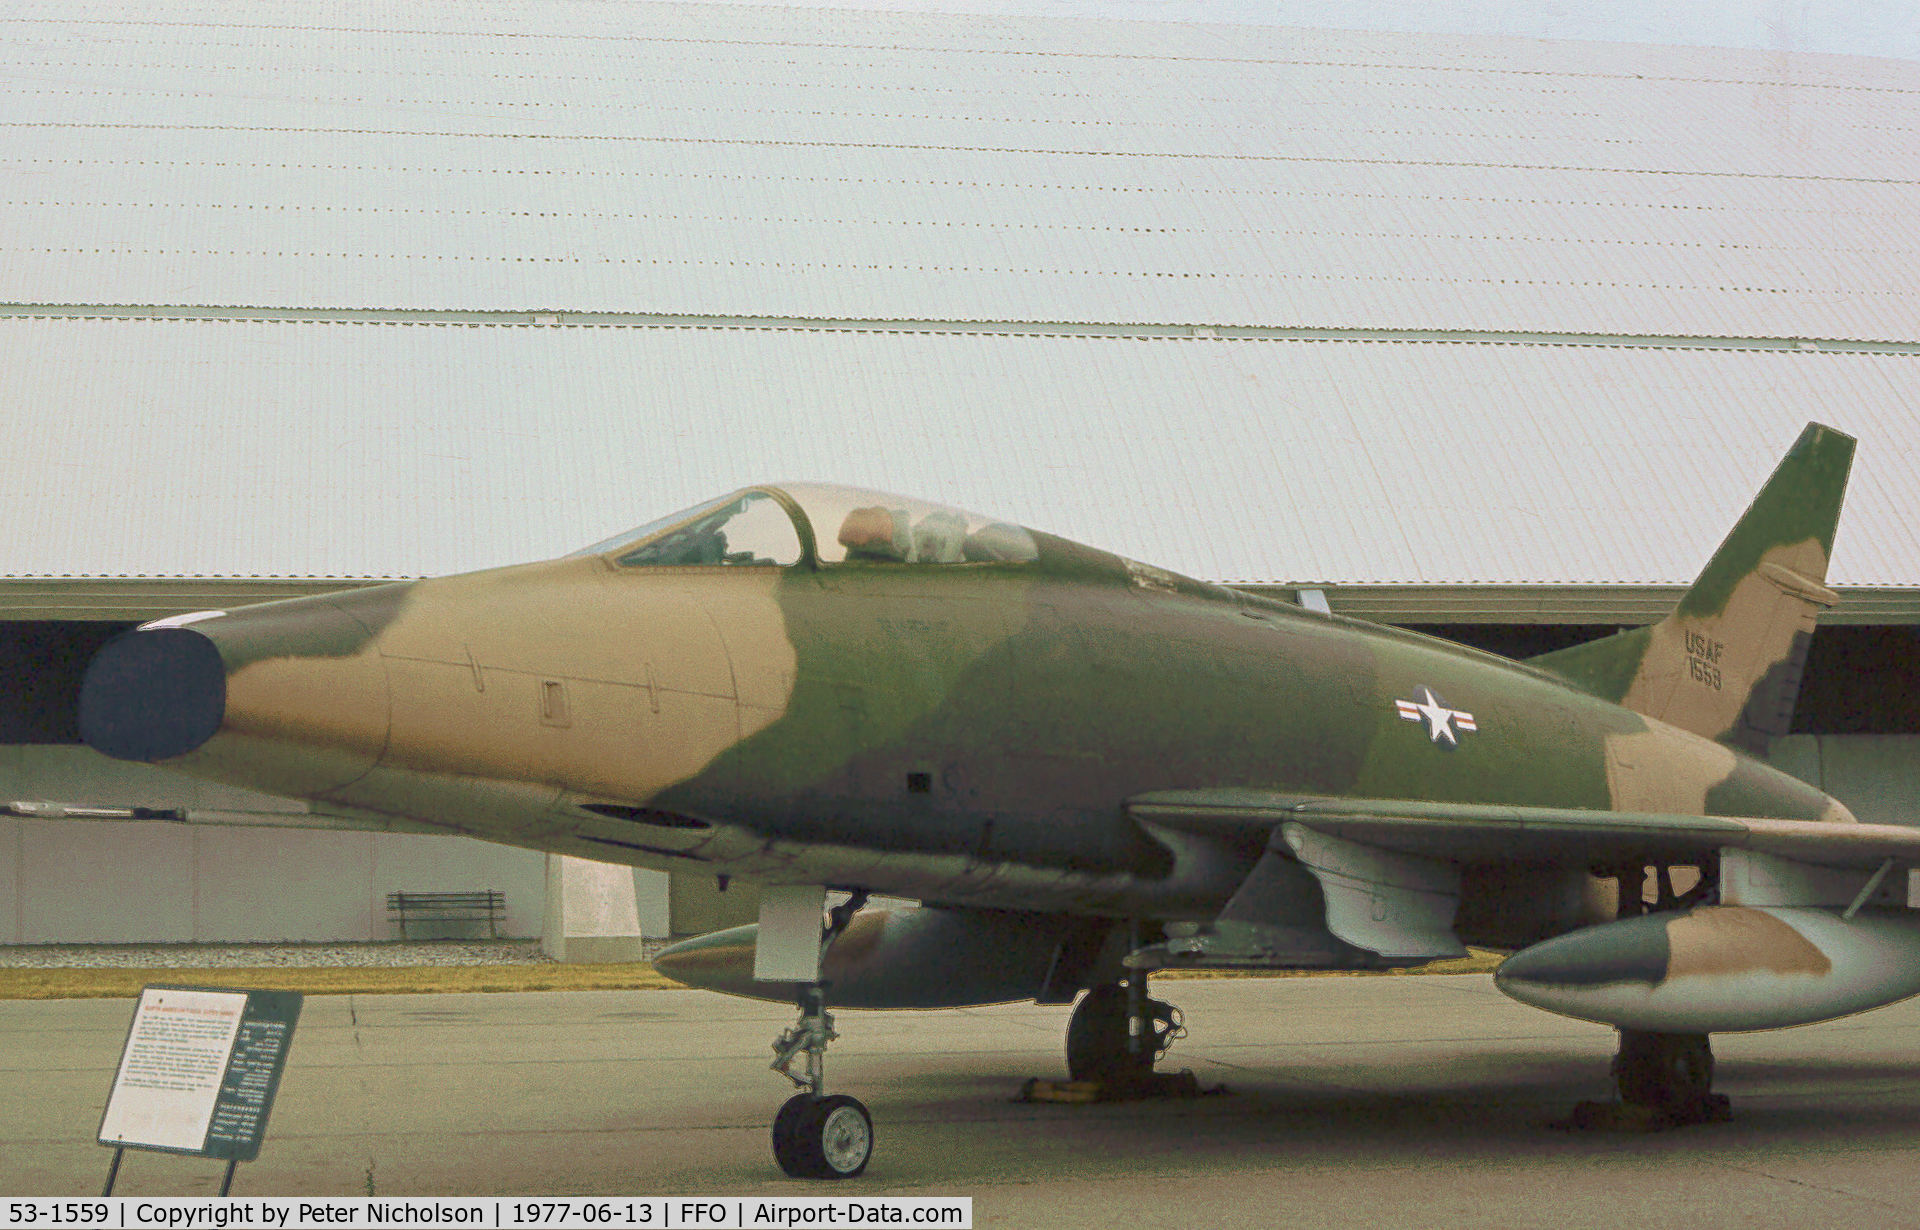 53-1559, 1953 North American F-100A Super Sabre C/N 192-54, Another view of this F-100A Super Sabre on display at the USAF Museum in the Summer of 1977.